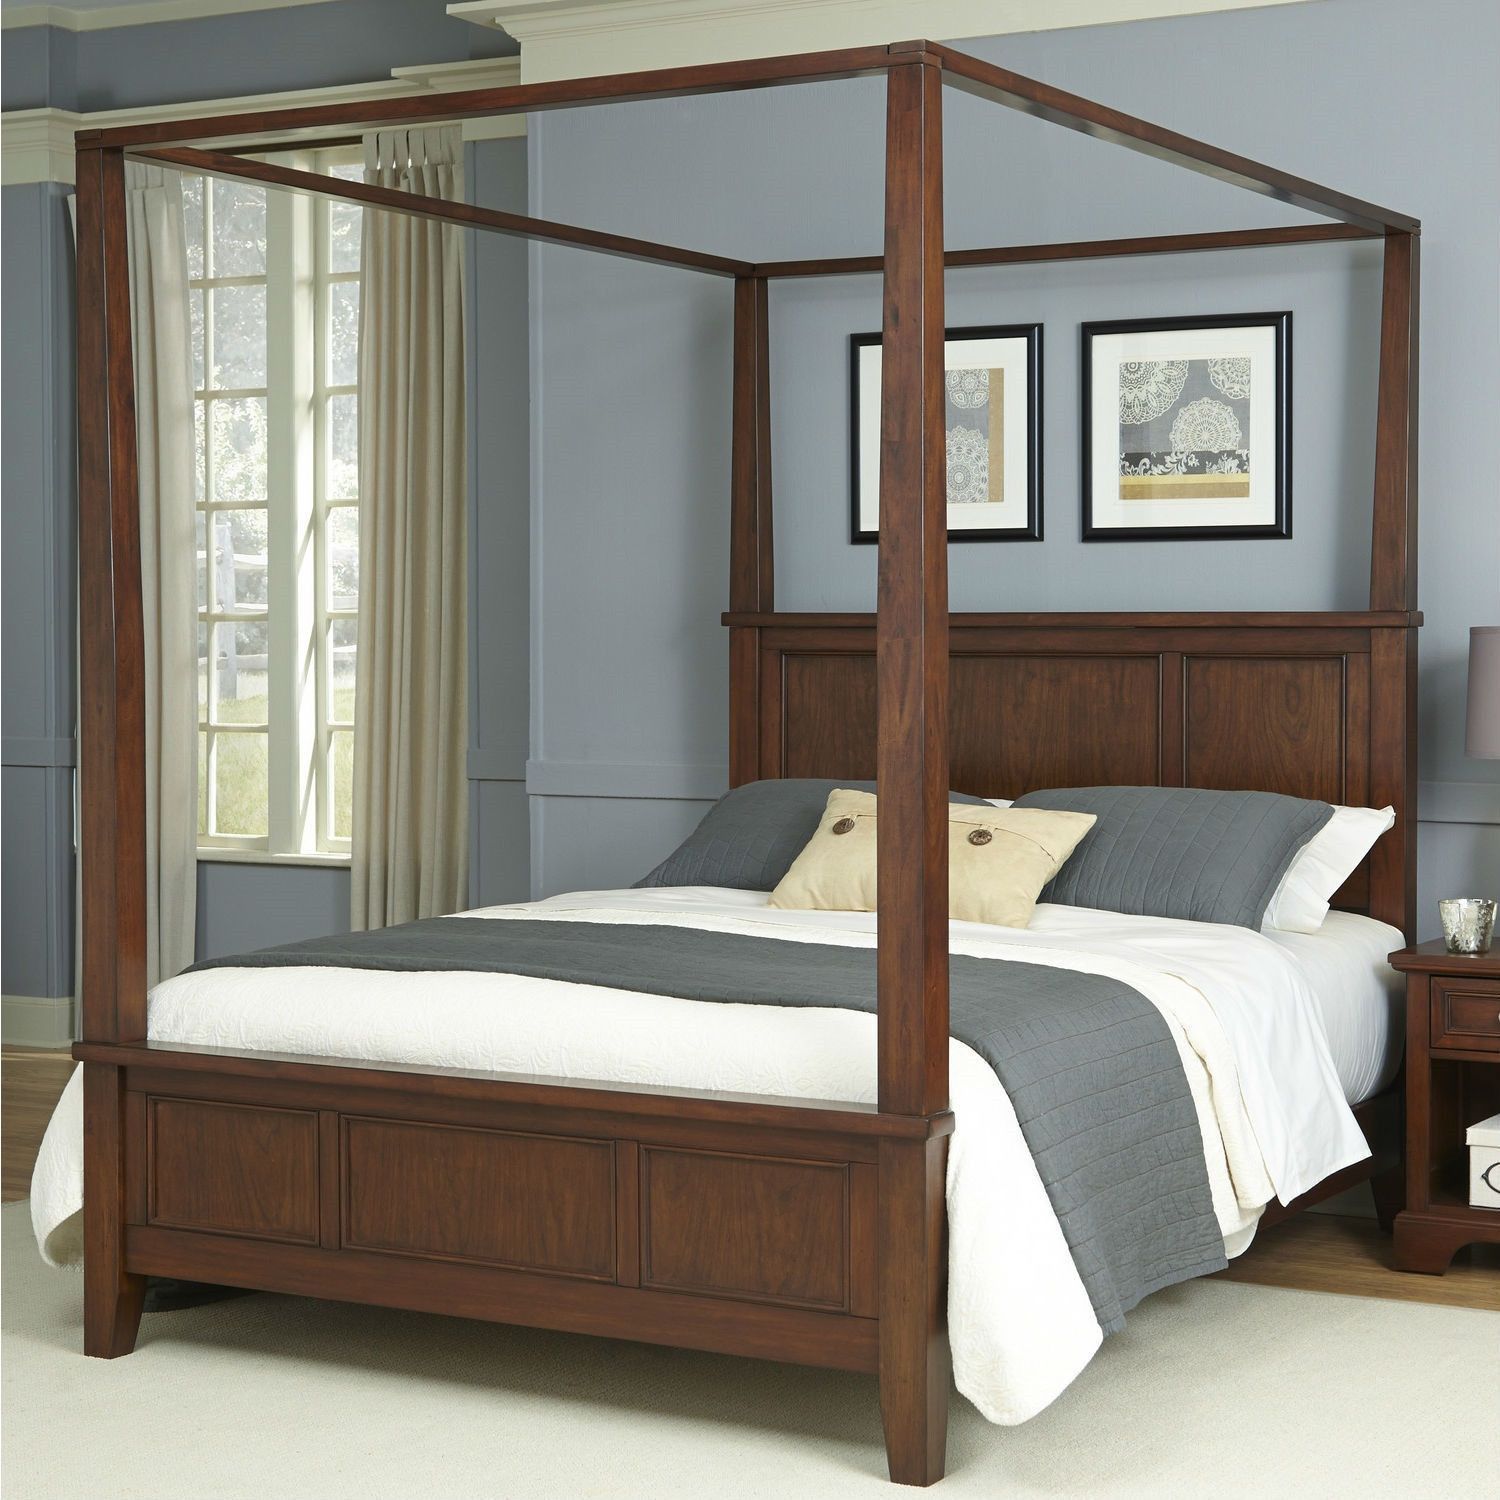 King size Modern Classic Canopy Bed in Cherry Wood Finish